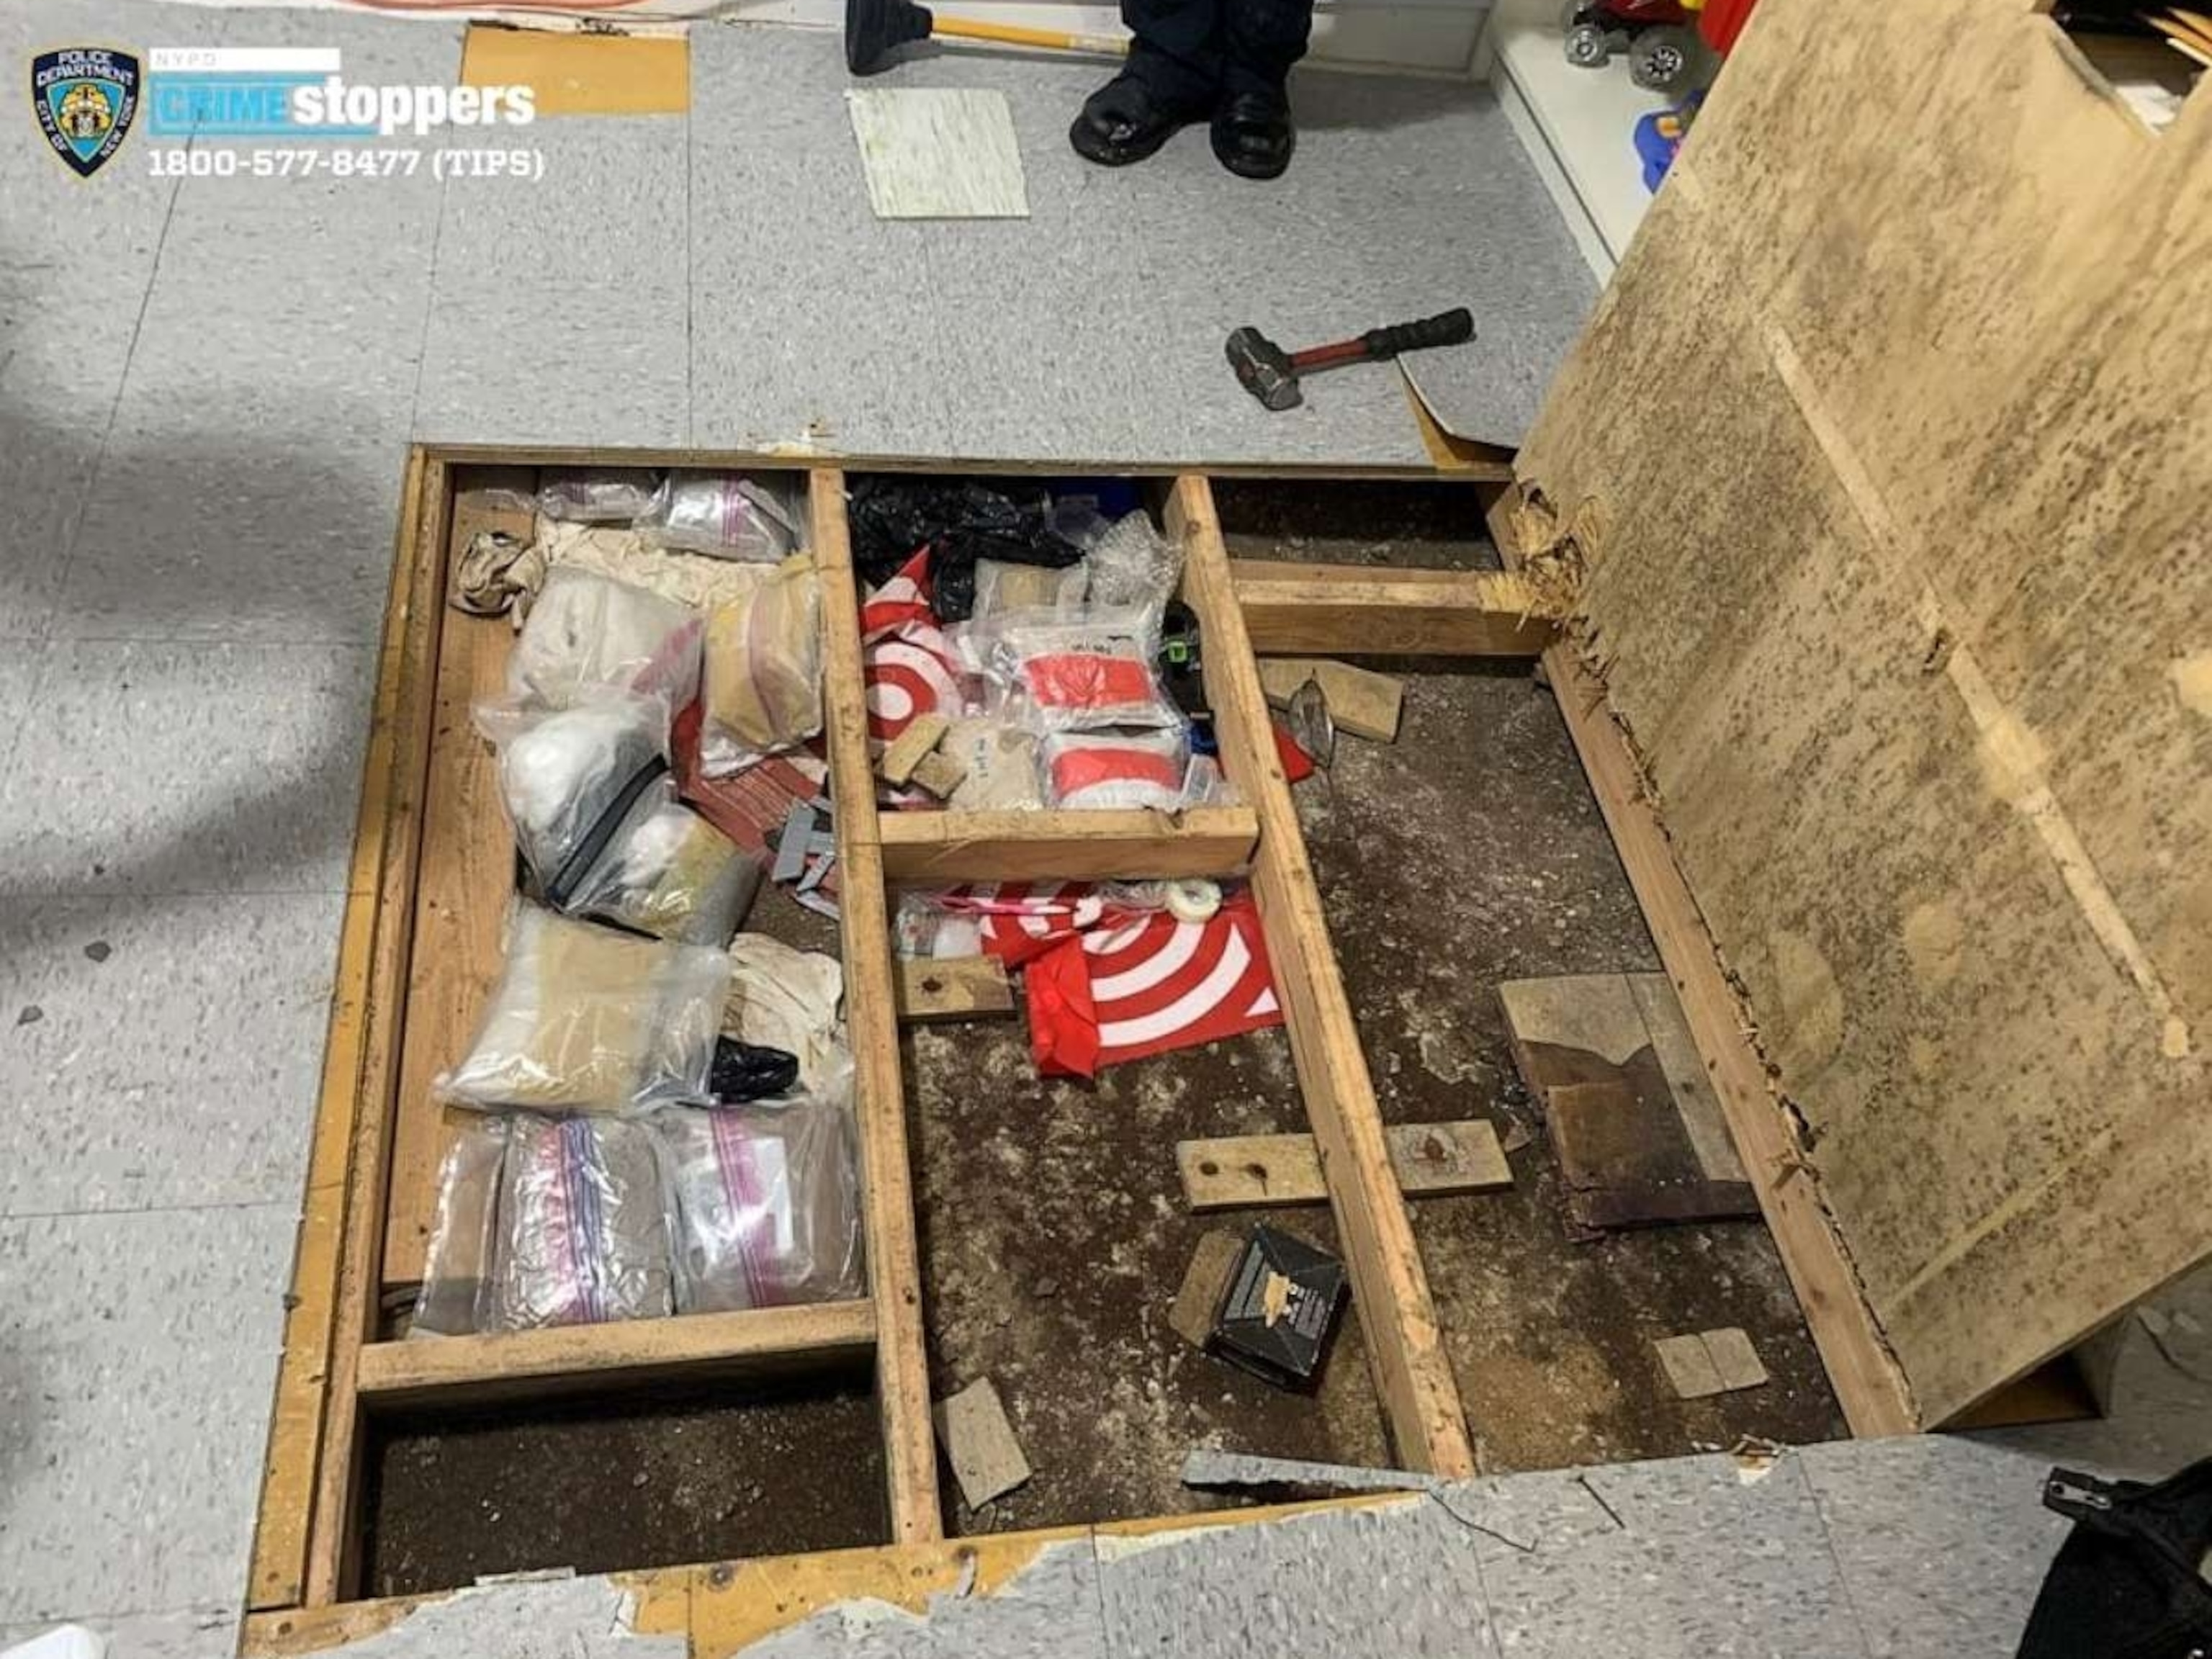 PHOTO: Police said they've found a trap floor with drugs in the play area of a day care where a 1-year-old boy died following exposure to fentanyl.